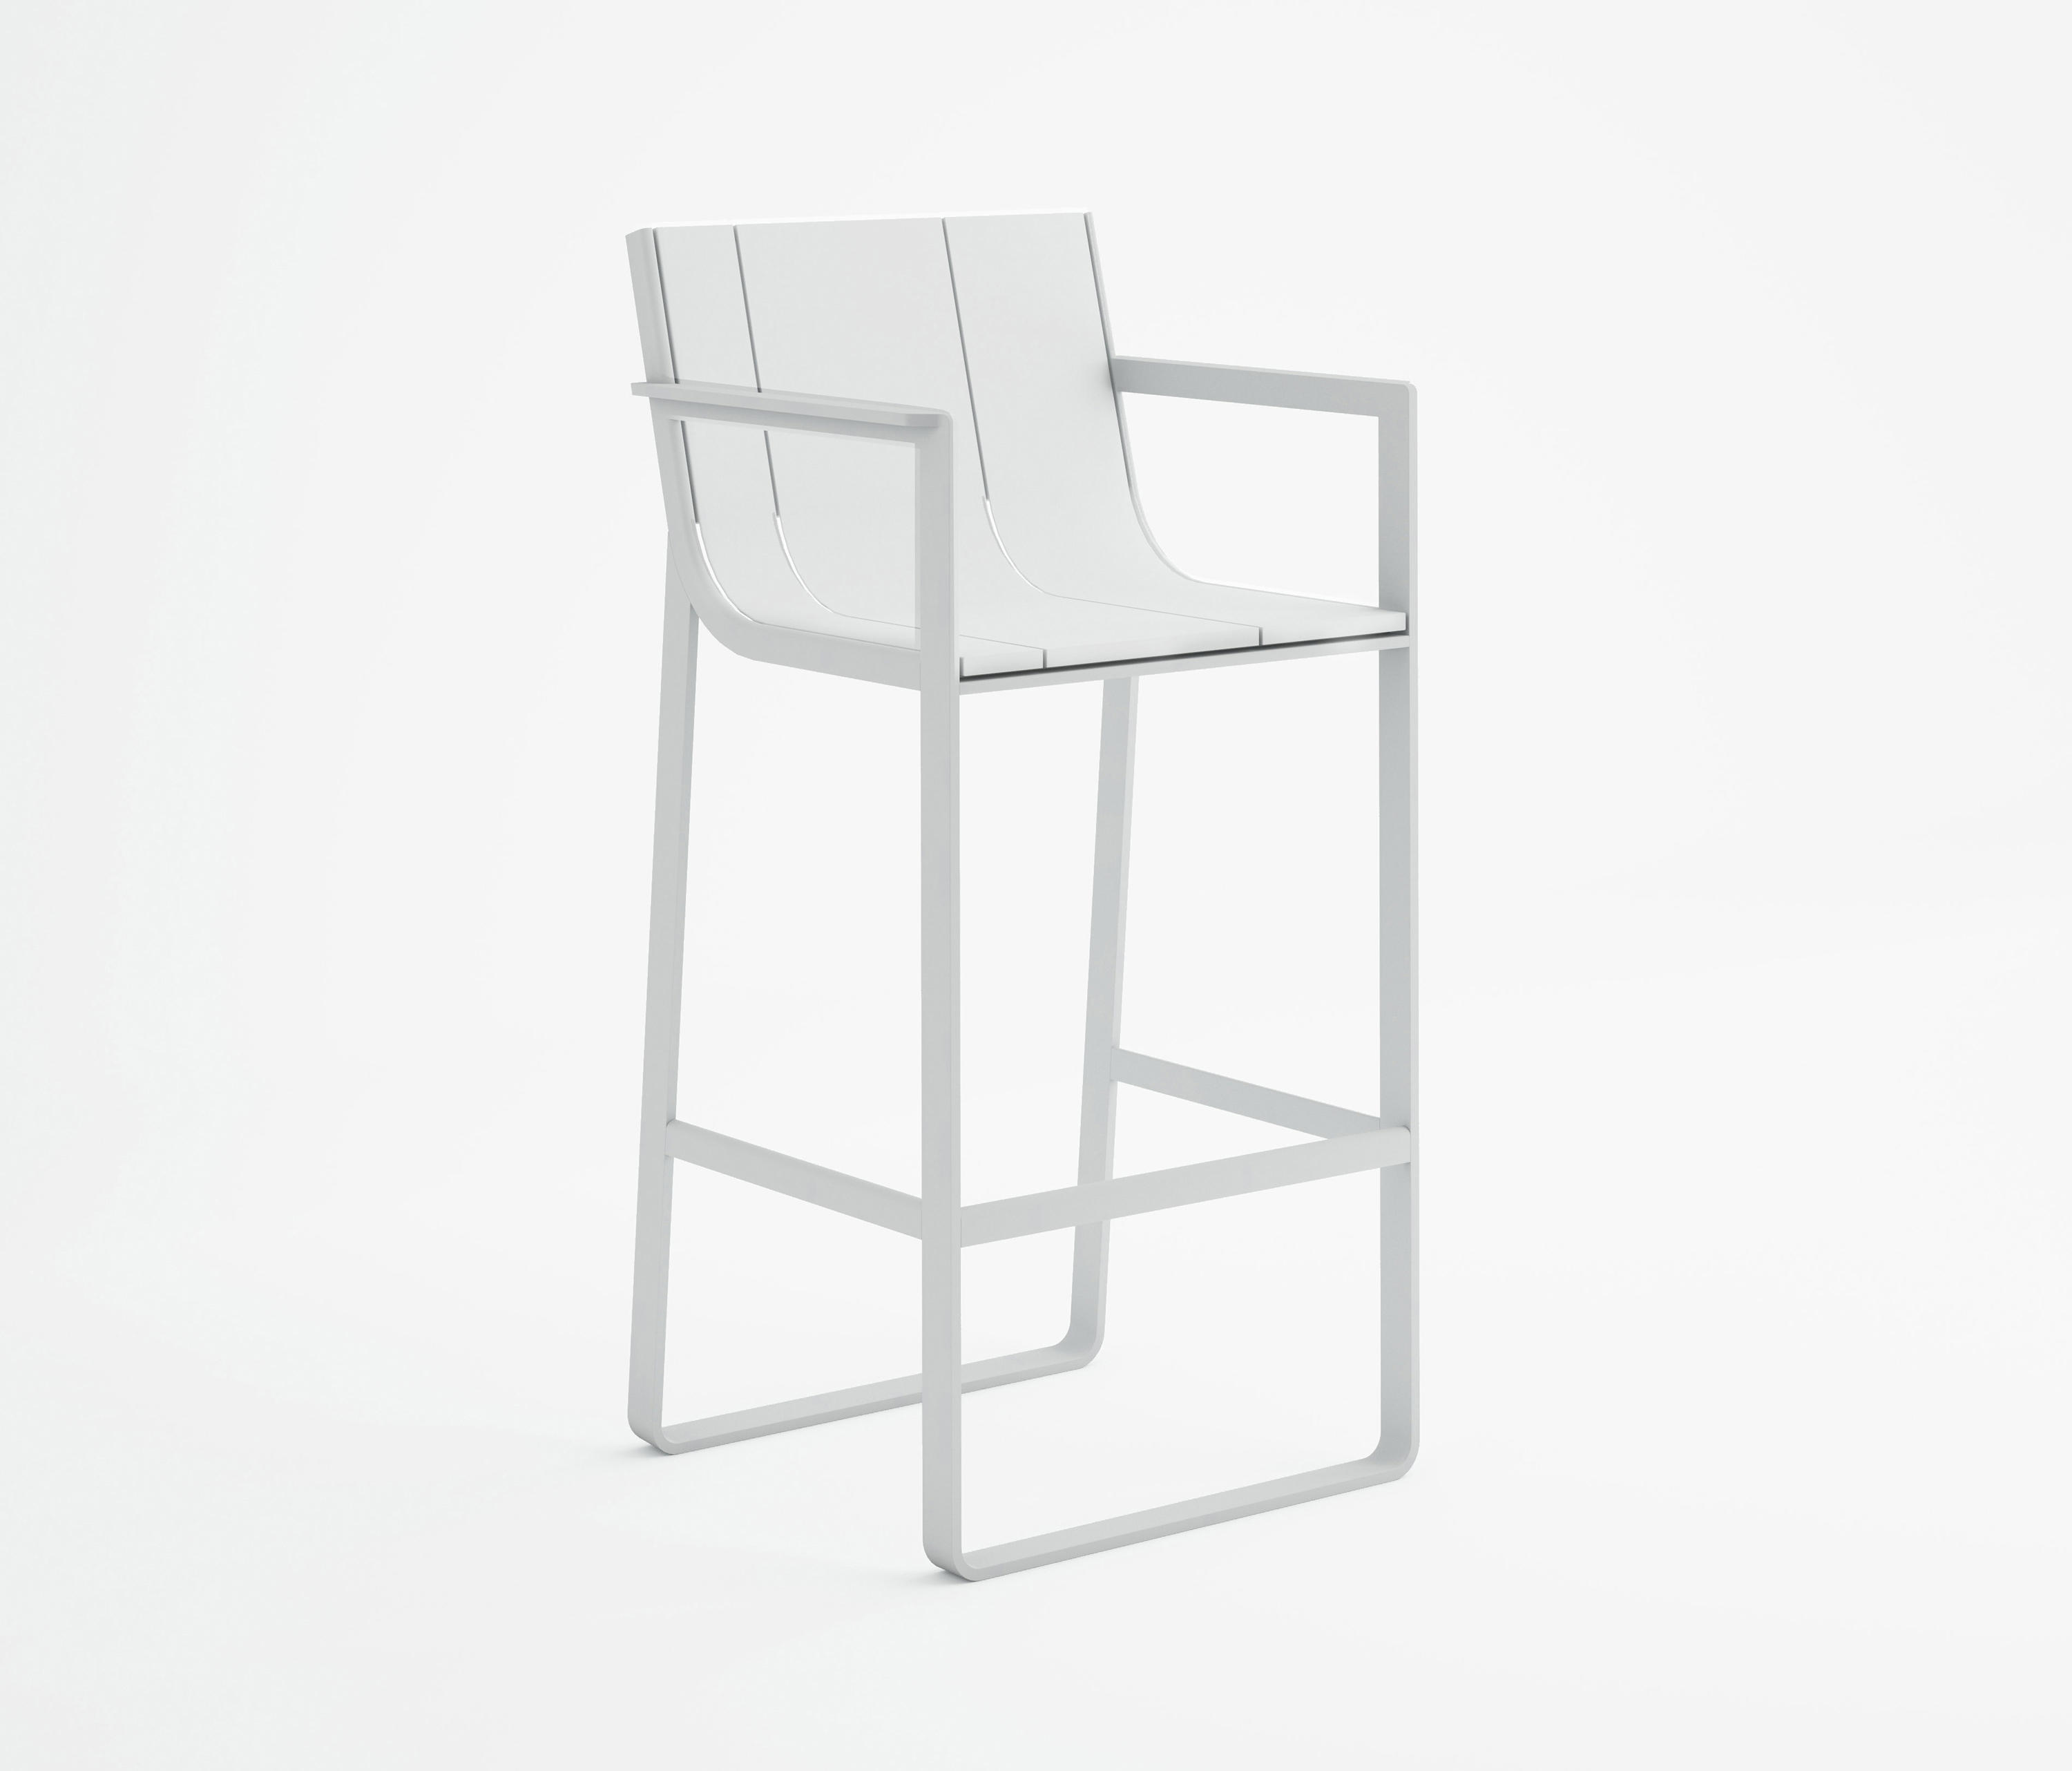 Flat Stool With High Backrest And Arms, Should I Be Worried About Flat Stools